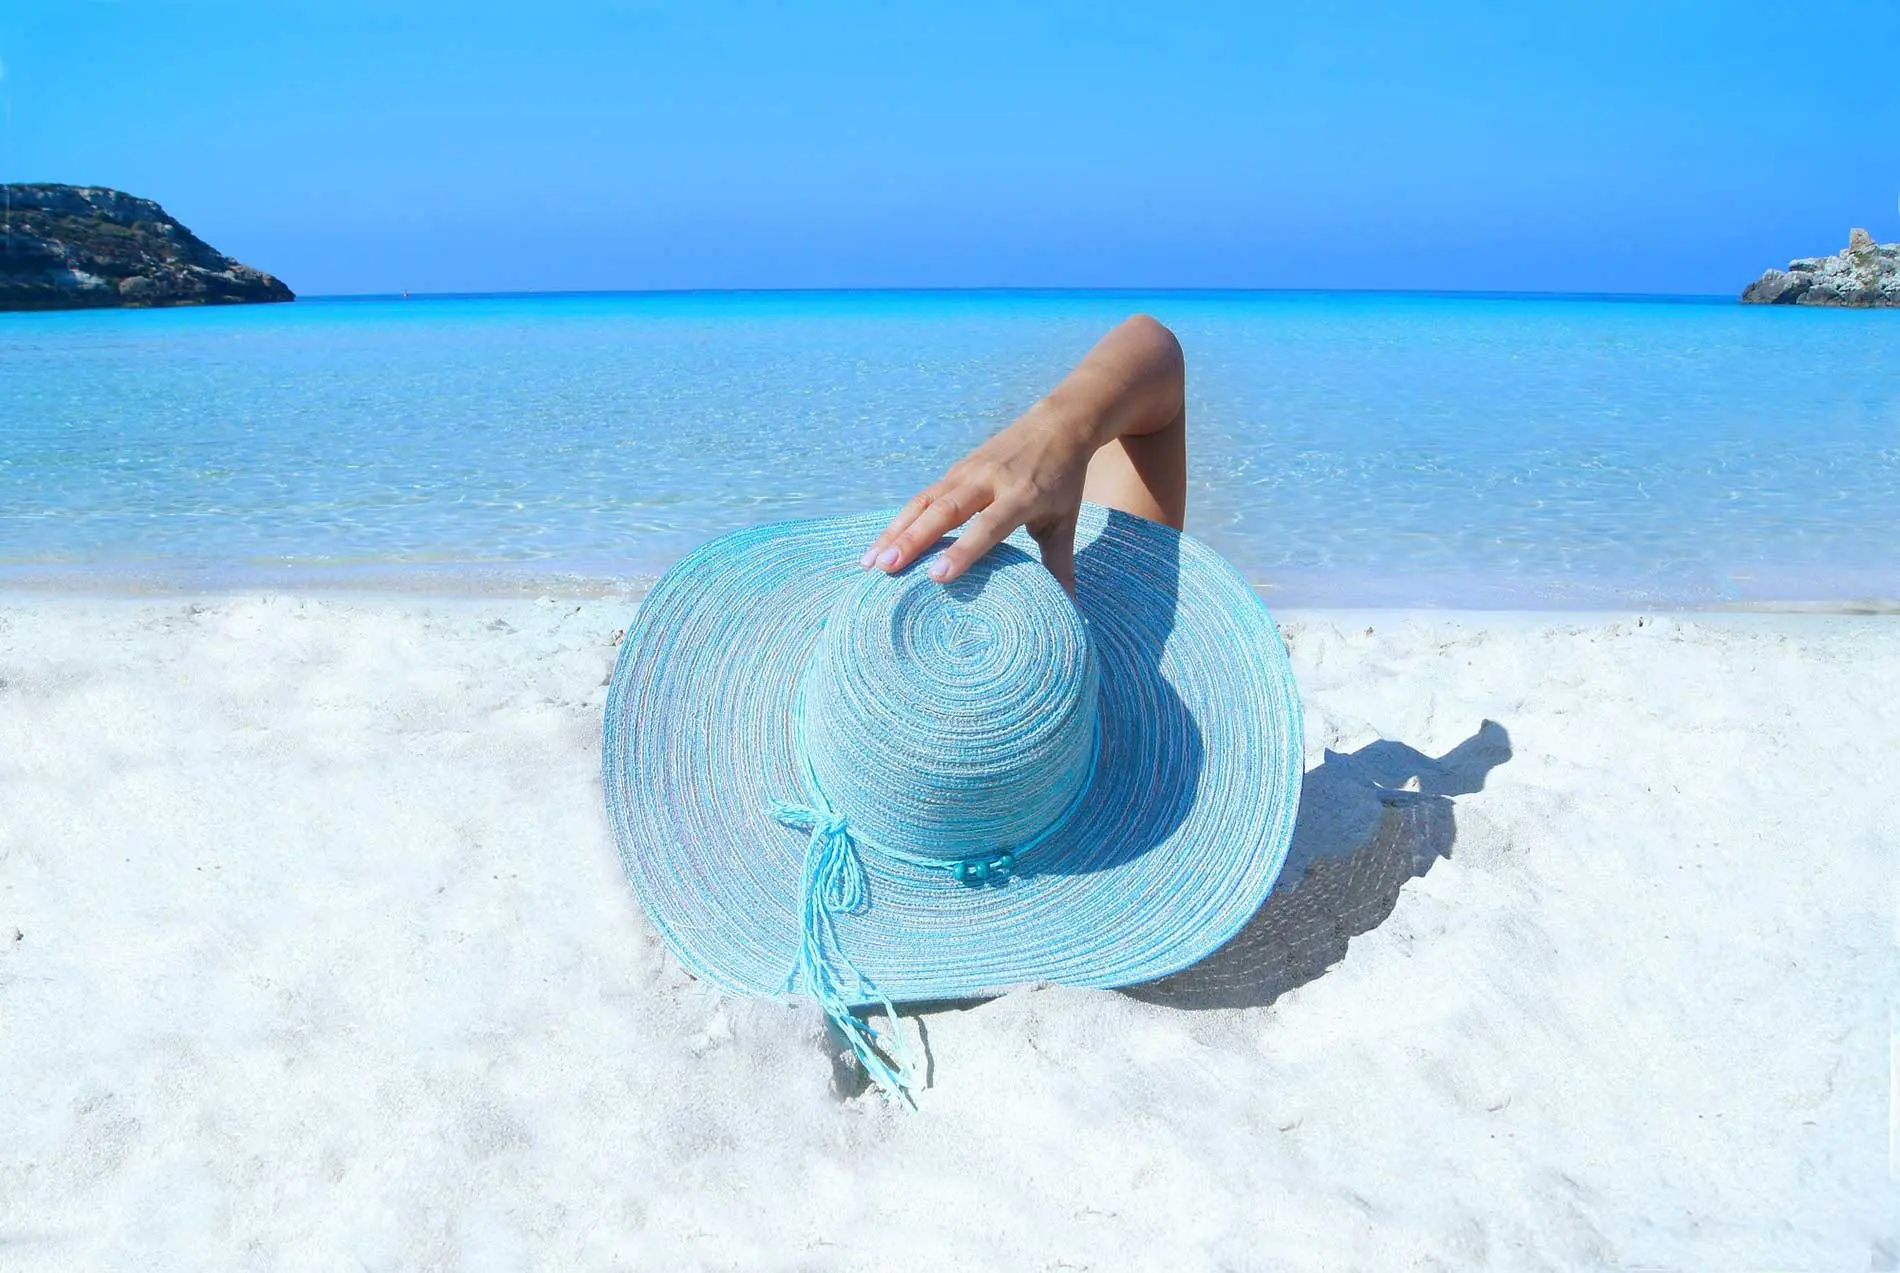 A person sitting on the beach with a hat in their hand.